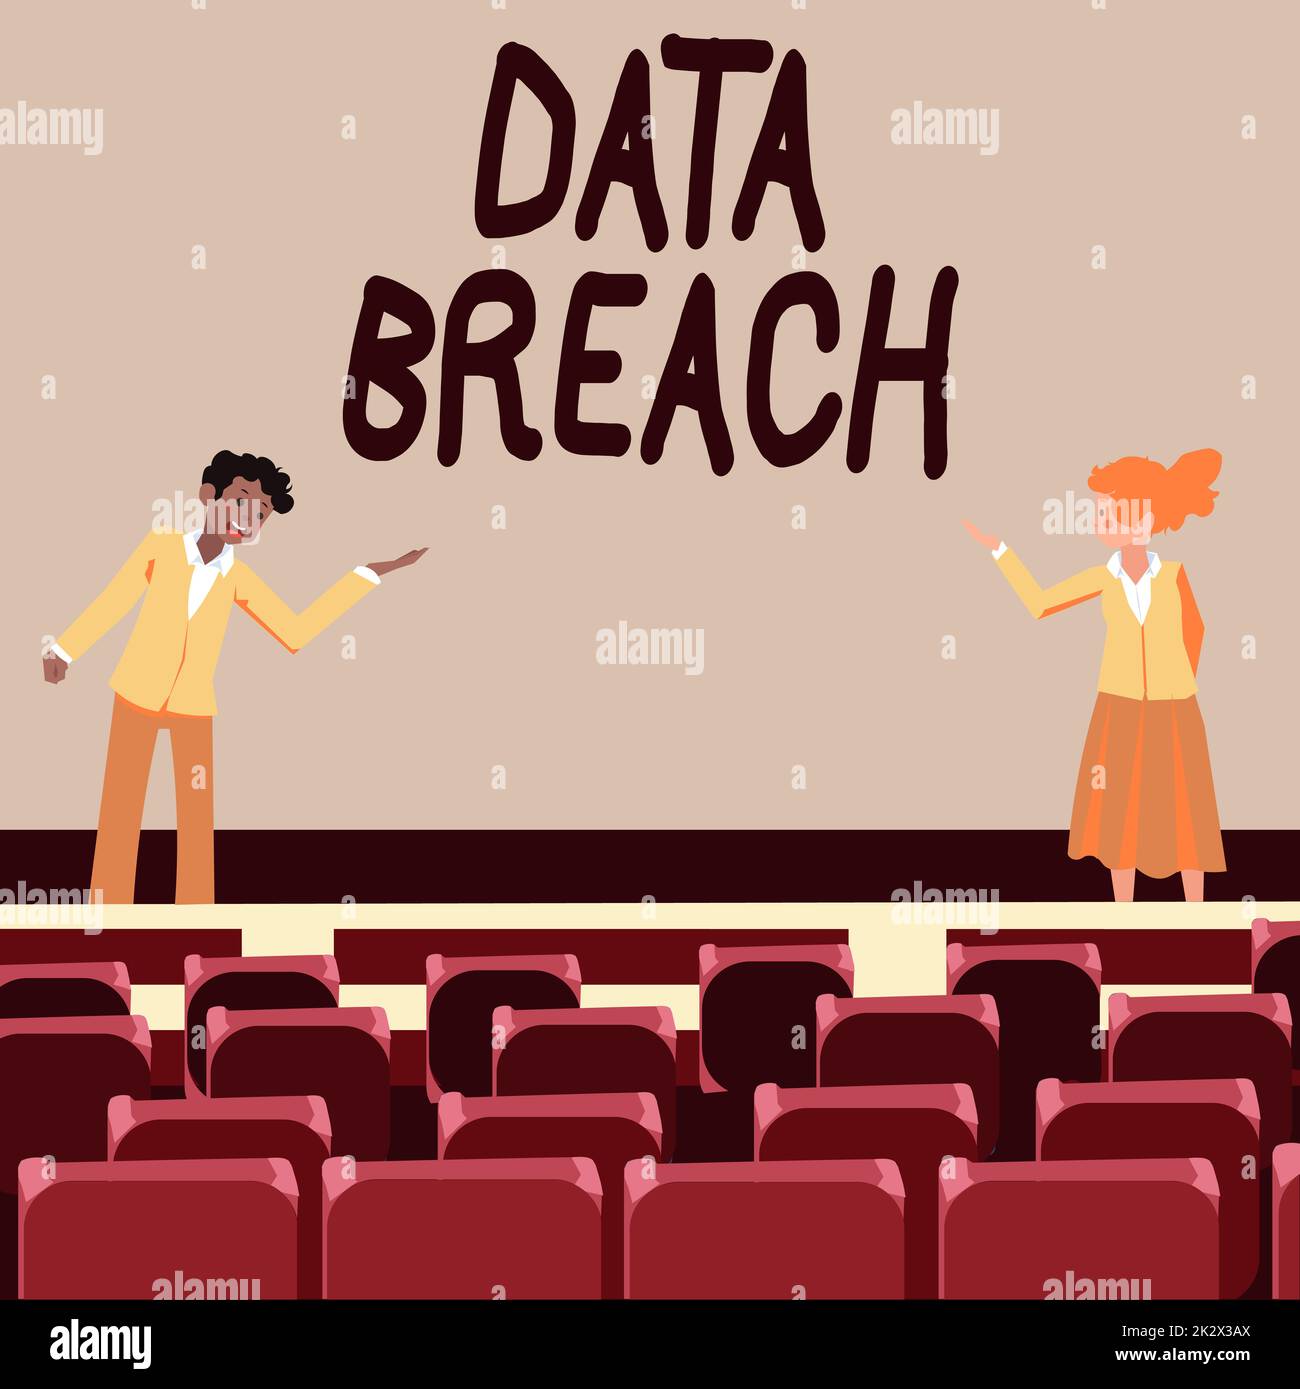 Text showing inspiration Data Breach, Business concept security incident where sensitive protected information copied Male and female colleagues doing Stock Photo